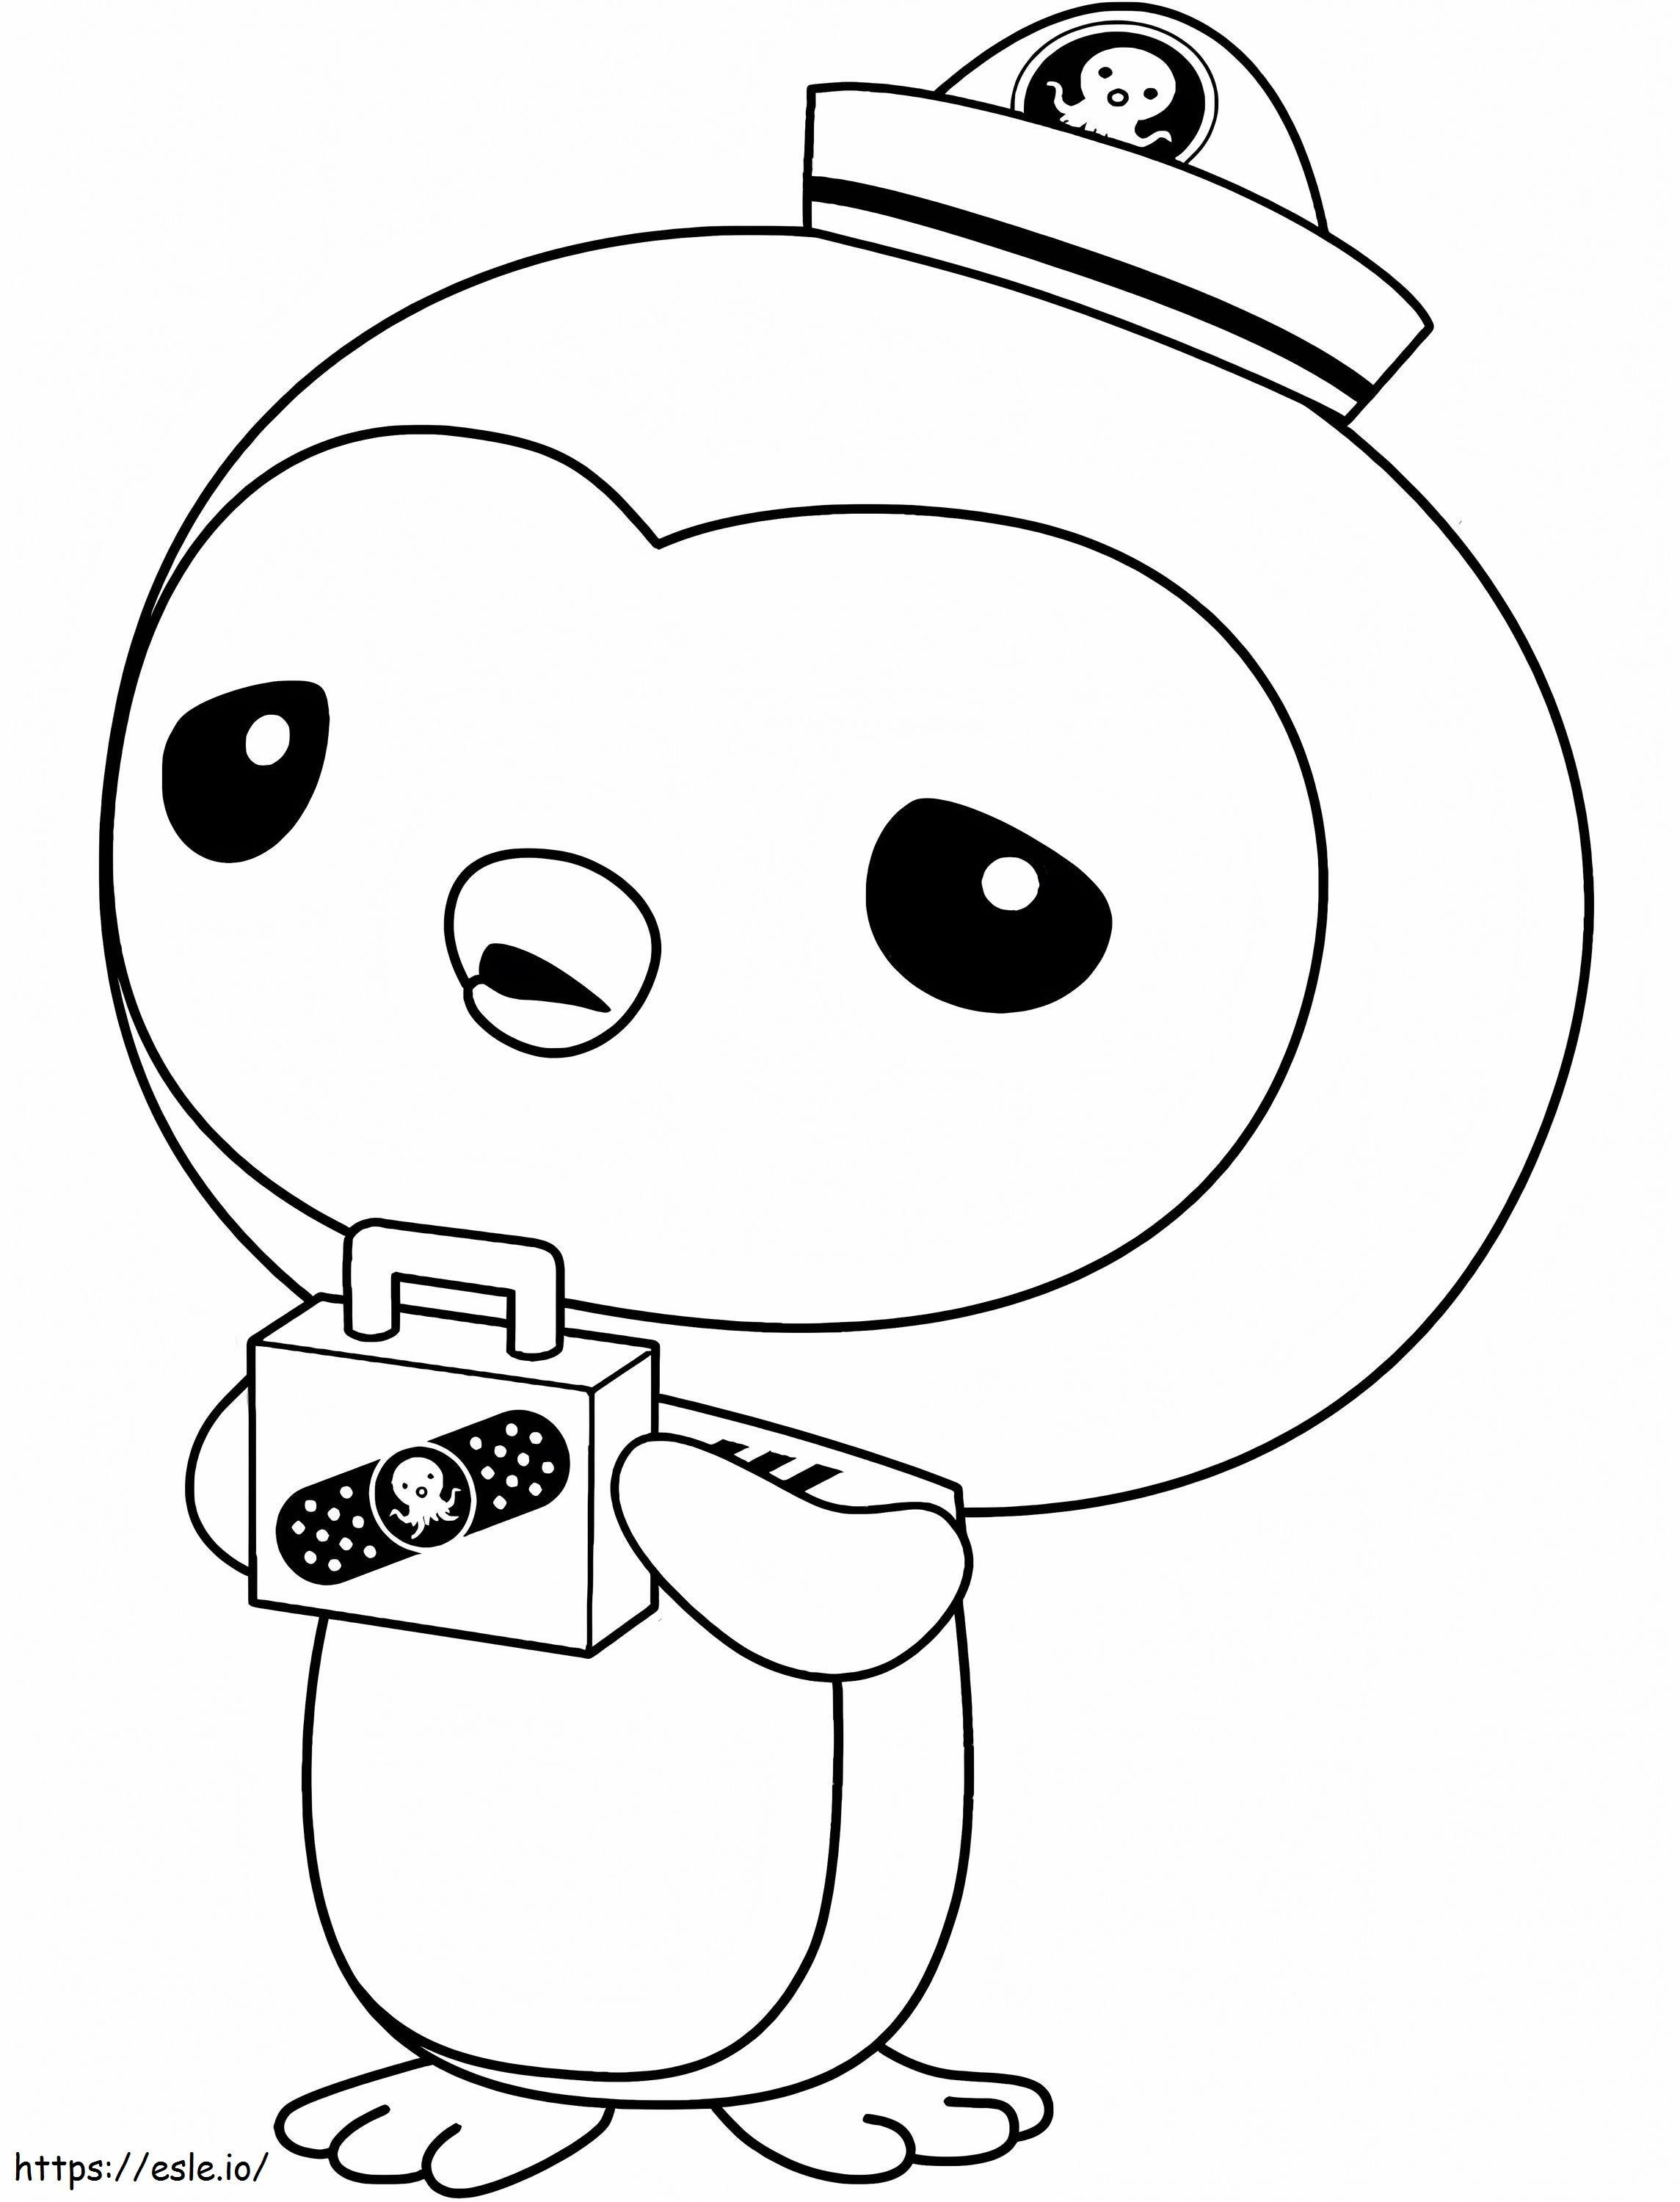 1567065137 Weight So Cute A4 coloring page